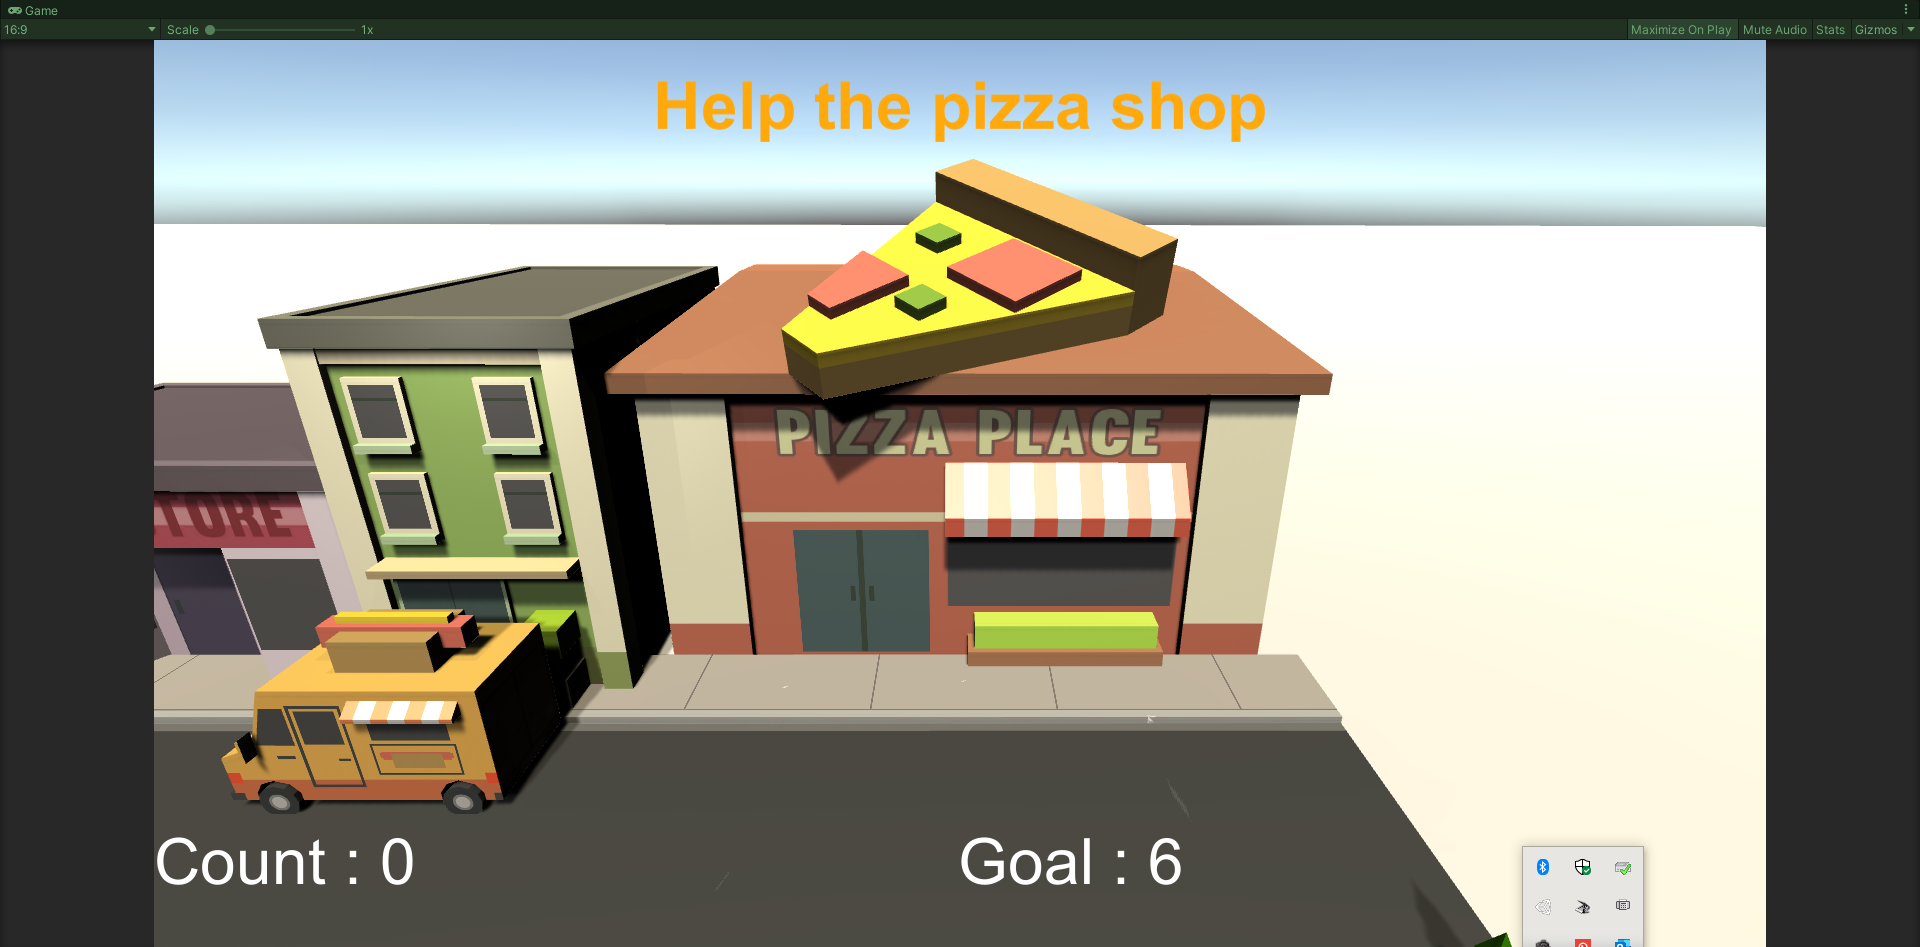 Counting Prototype - Help the Pizza Shop